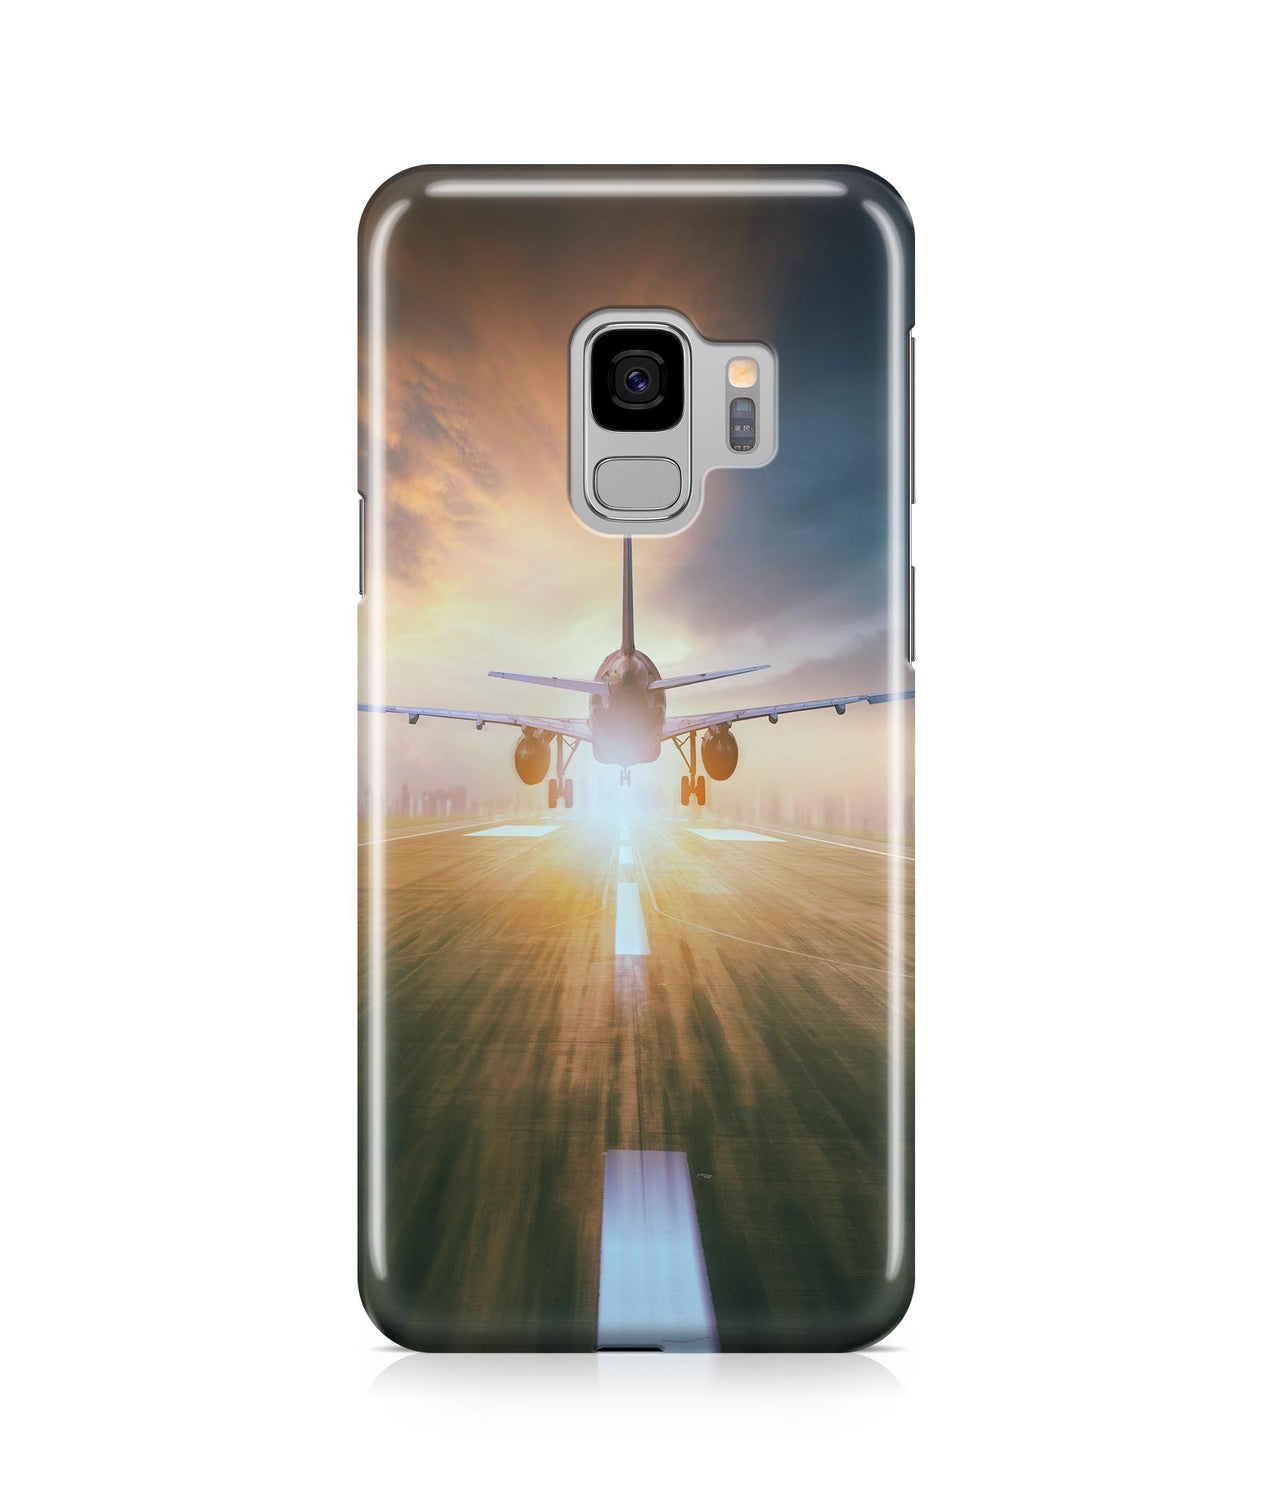 Airplane Flying Over Runway Printed Samsung J Cases